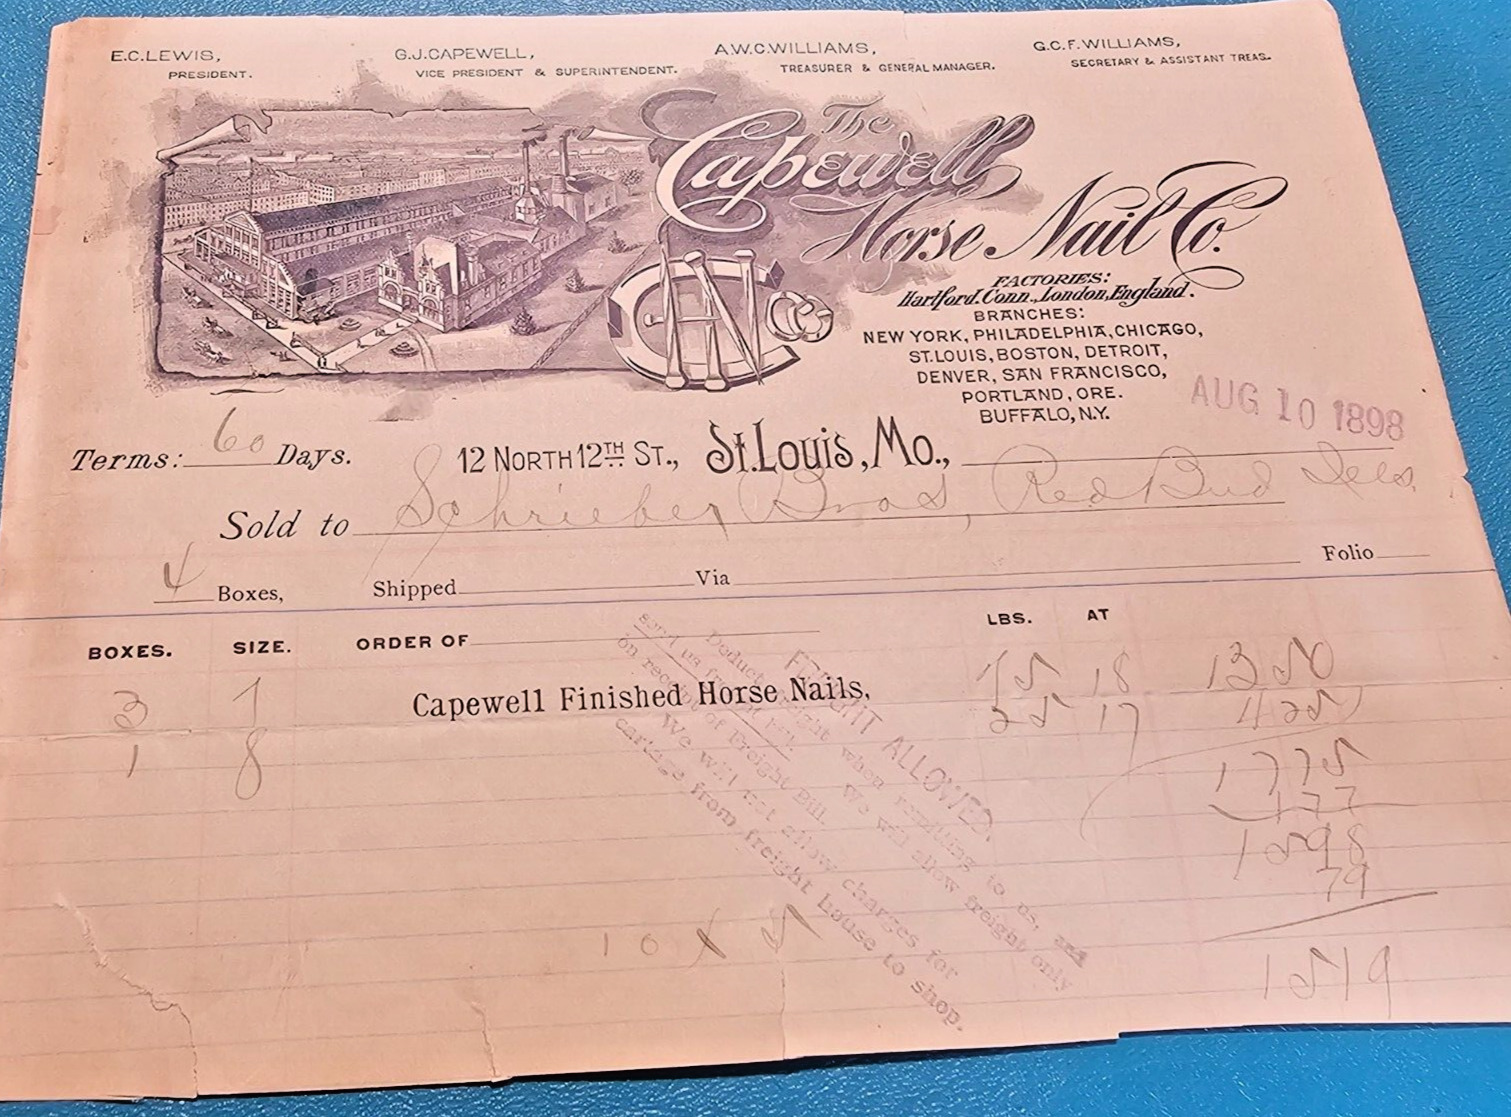 Vintage Illustrated Letterhead CAPEWELL HORSE NAIL CO Hartford CT AUG 10 1898